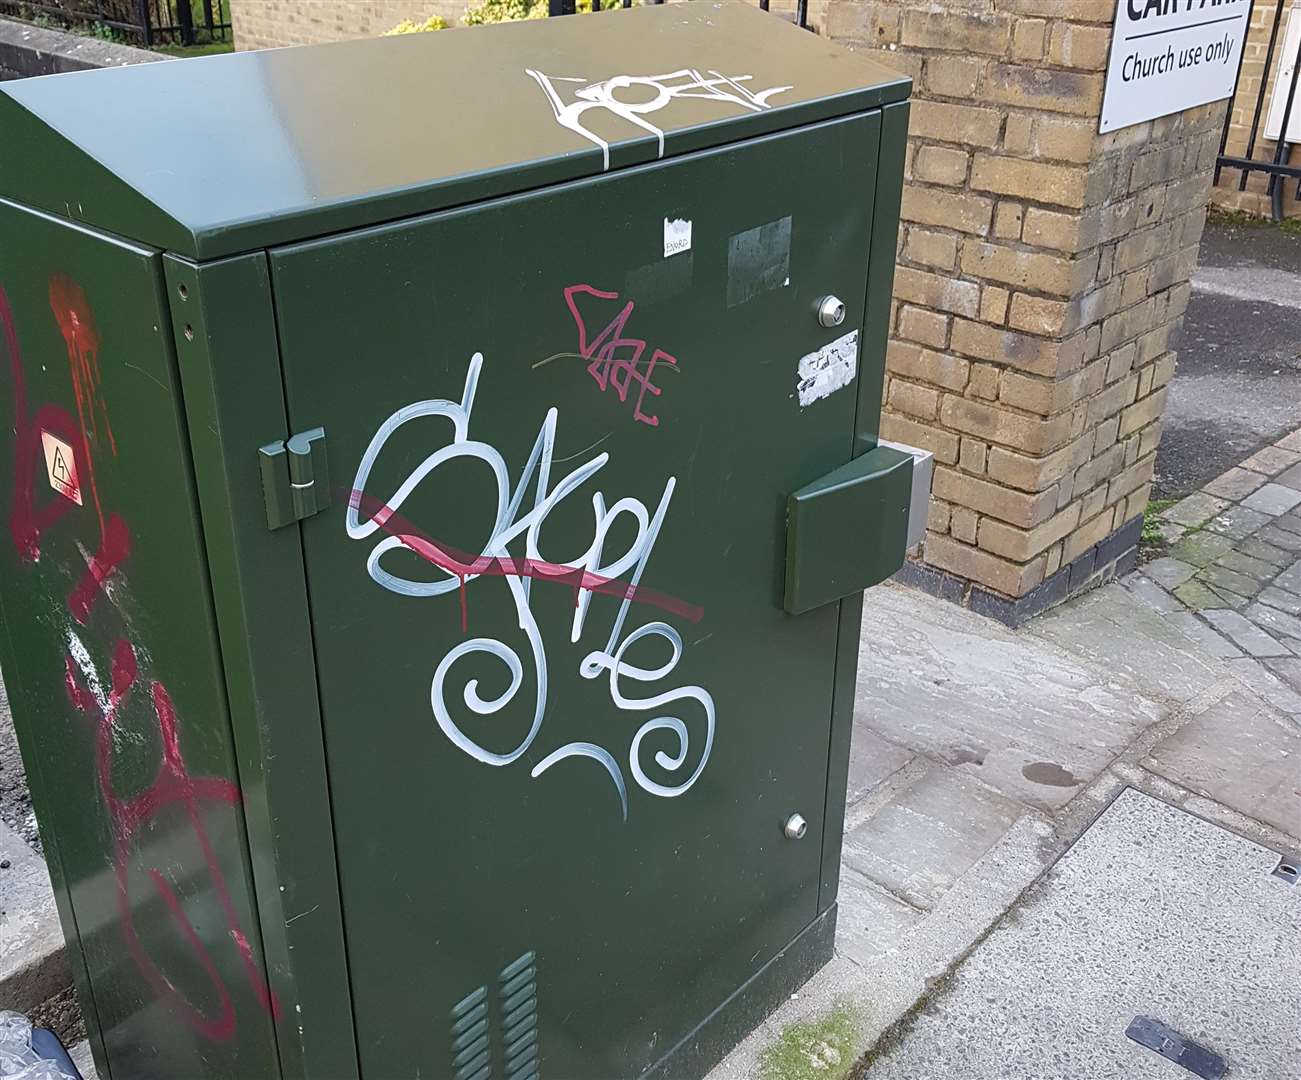 One of the familiar tags (6532155)